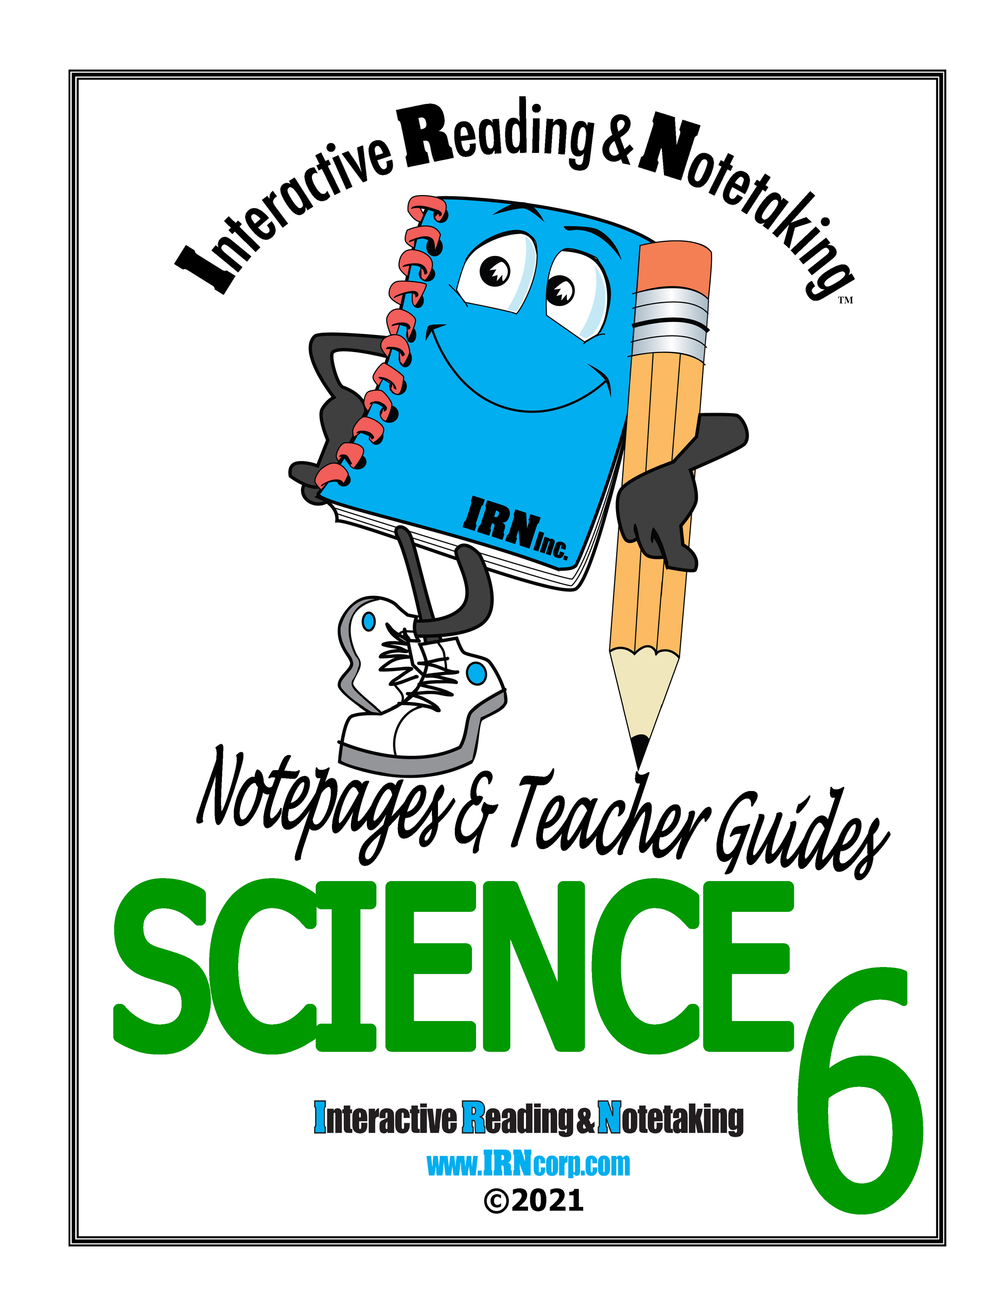 Science　License　School　Notetaking　Site　—　Interactive　Reading